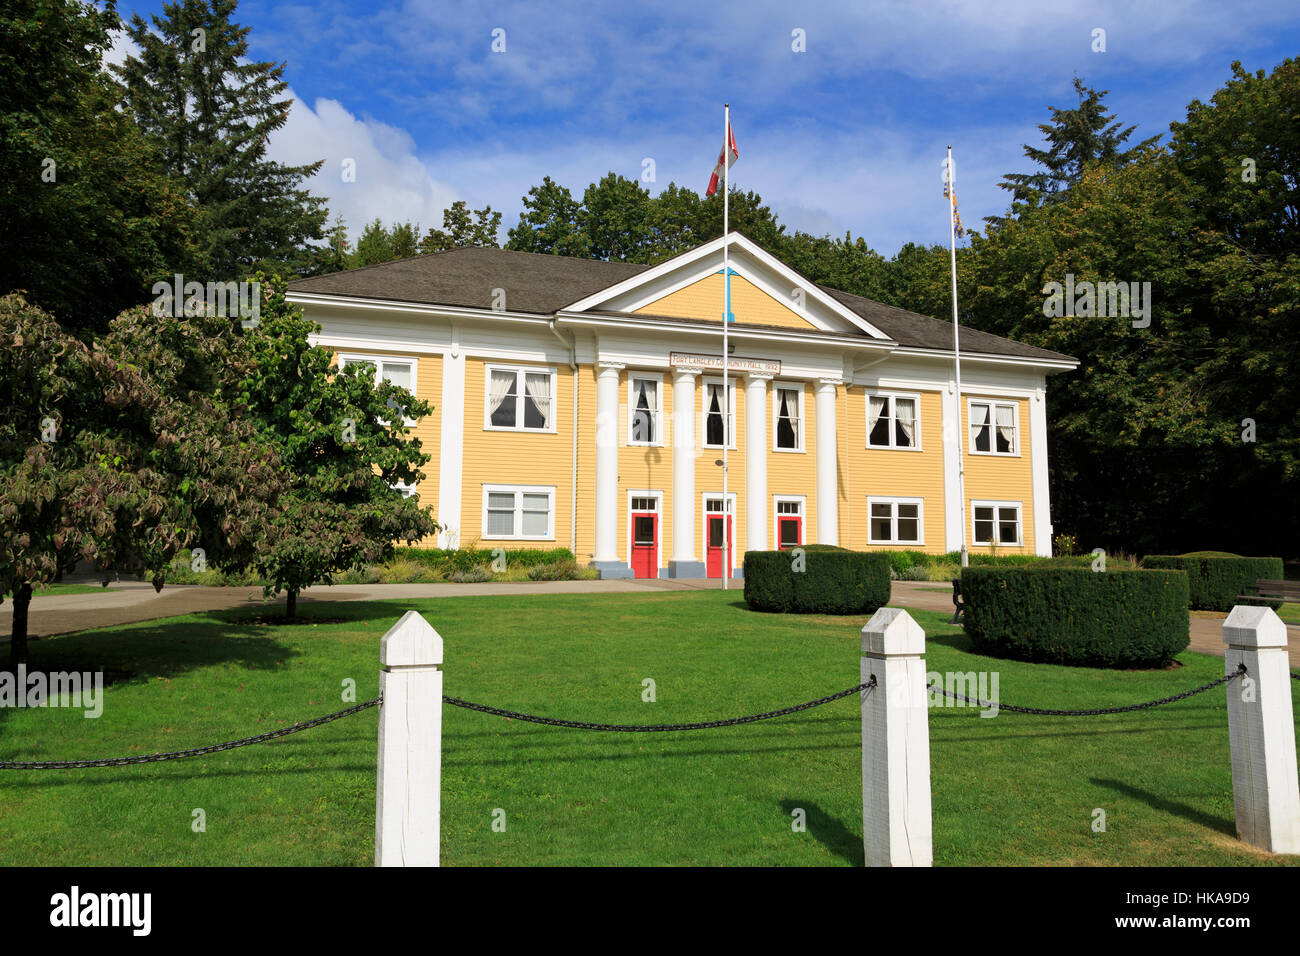 Fort Langley Community Hall, Fort Langley, Vancouver region, British Columbia, Canada Stock Photo